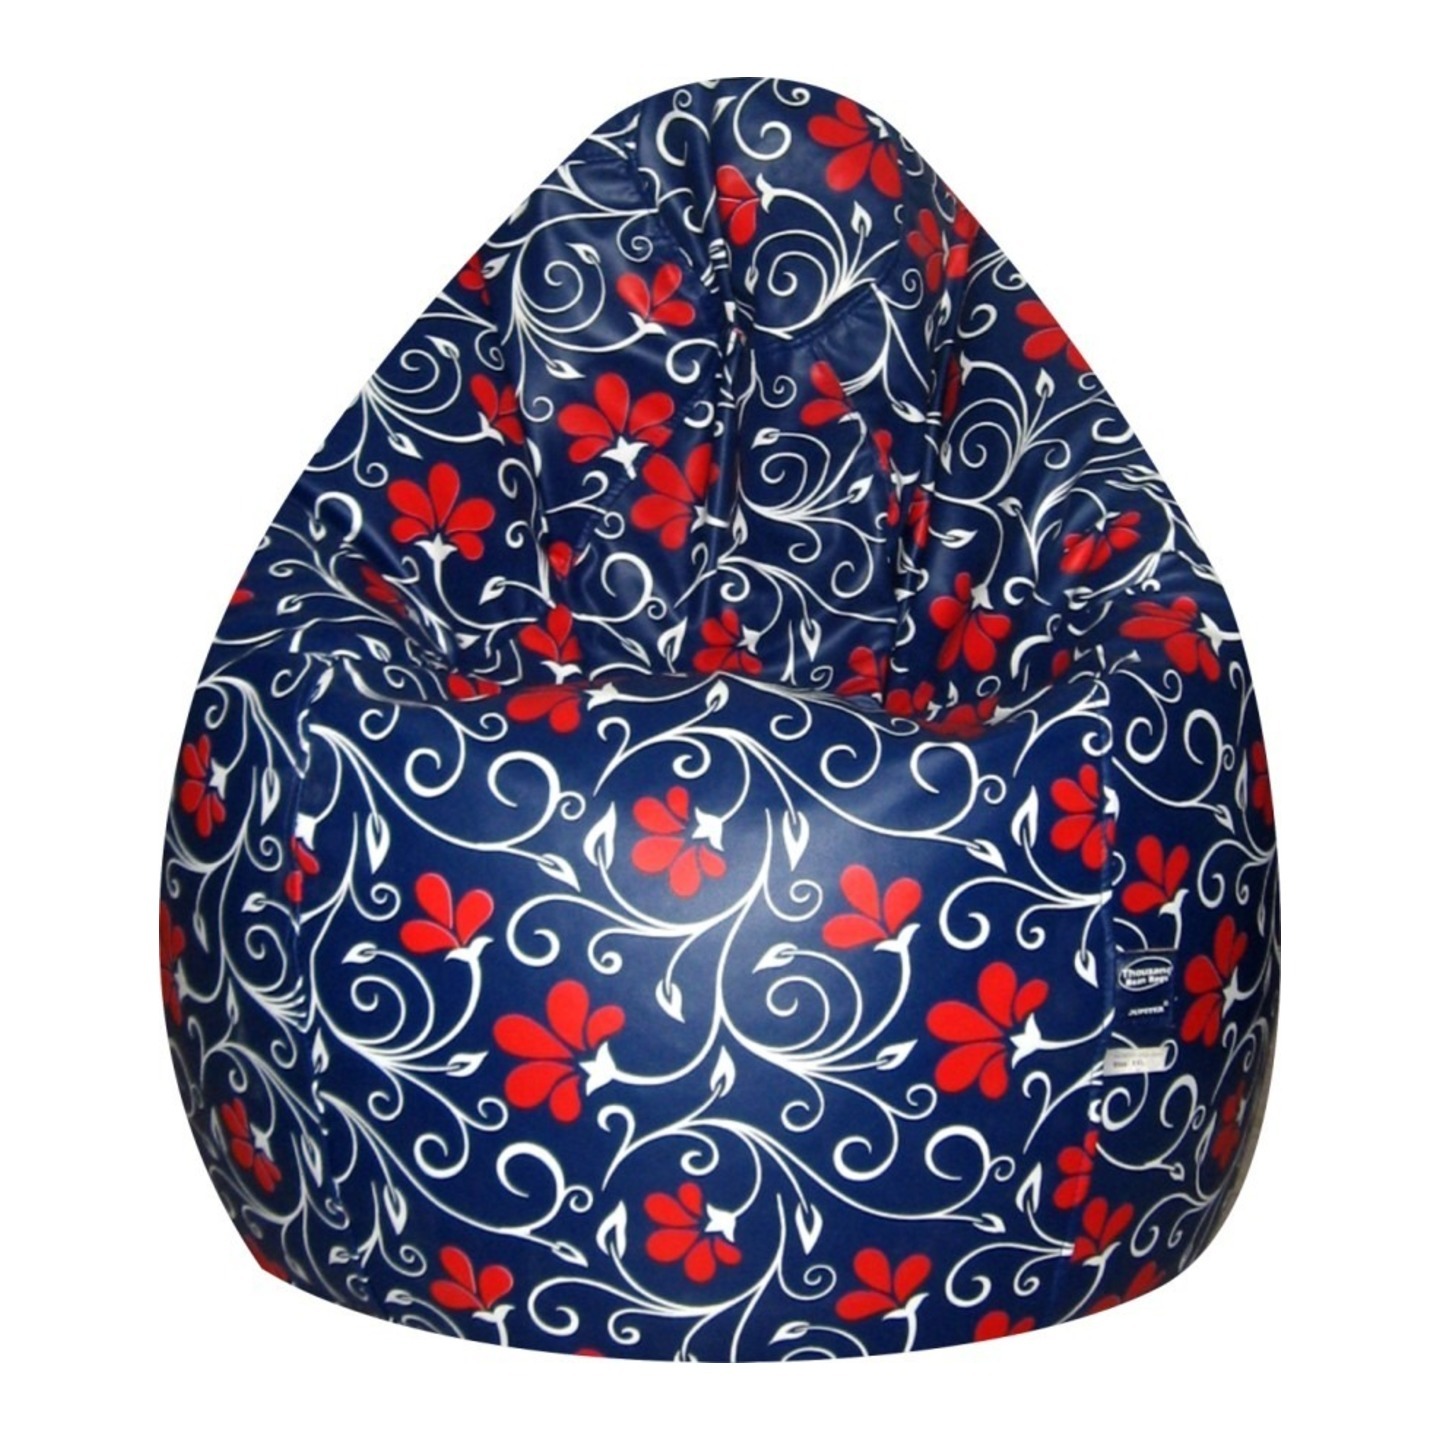 VFR XXL Bean Bag With Beans Printed In Blue & Red Colour